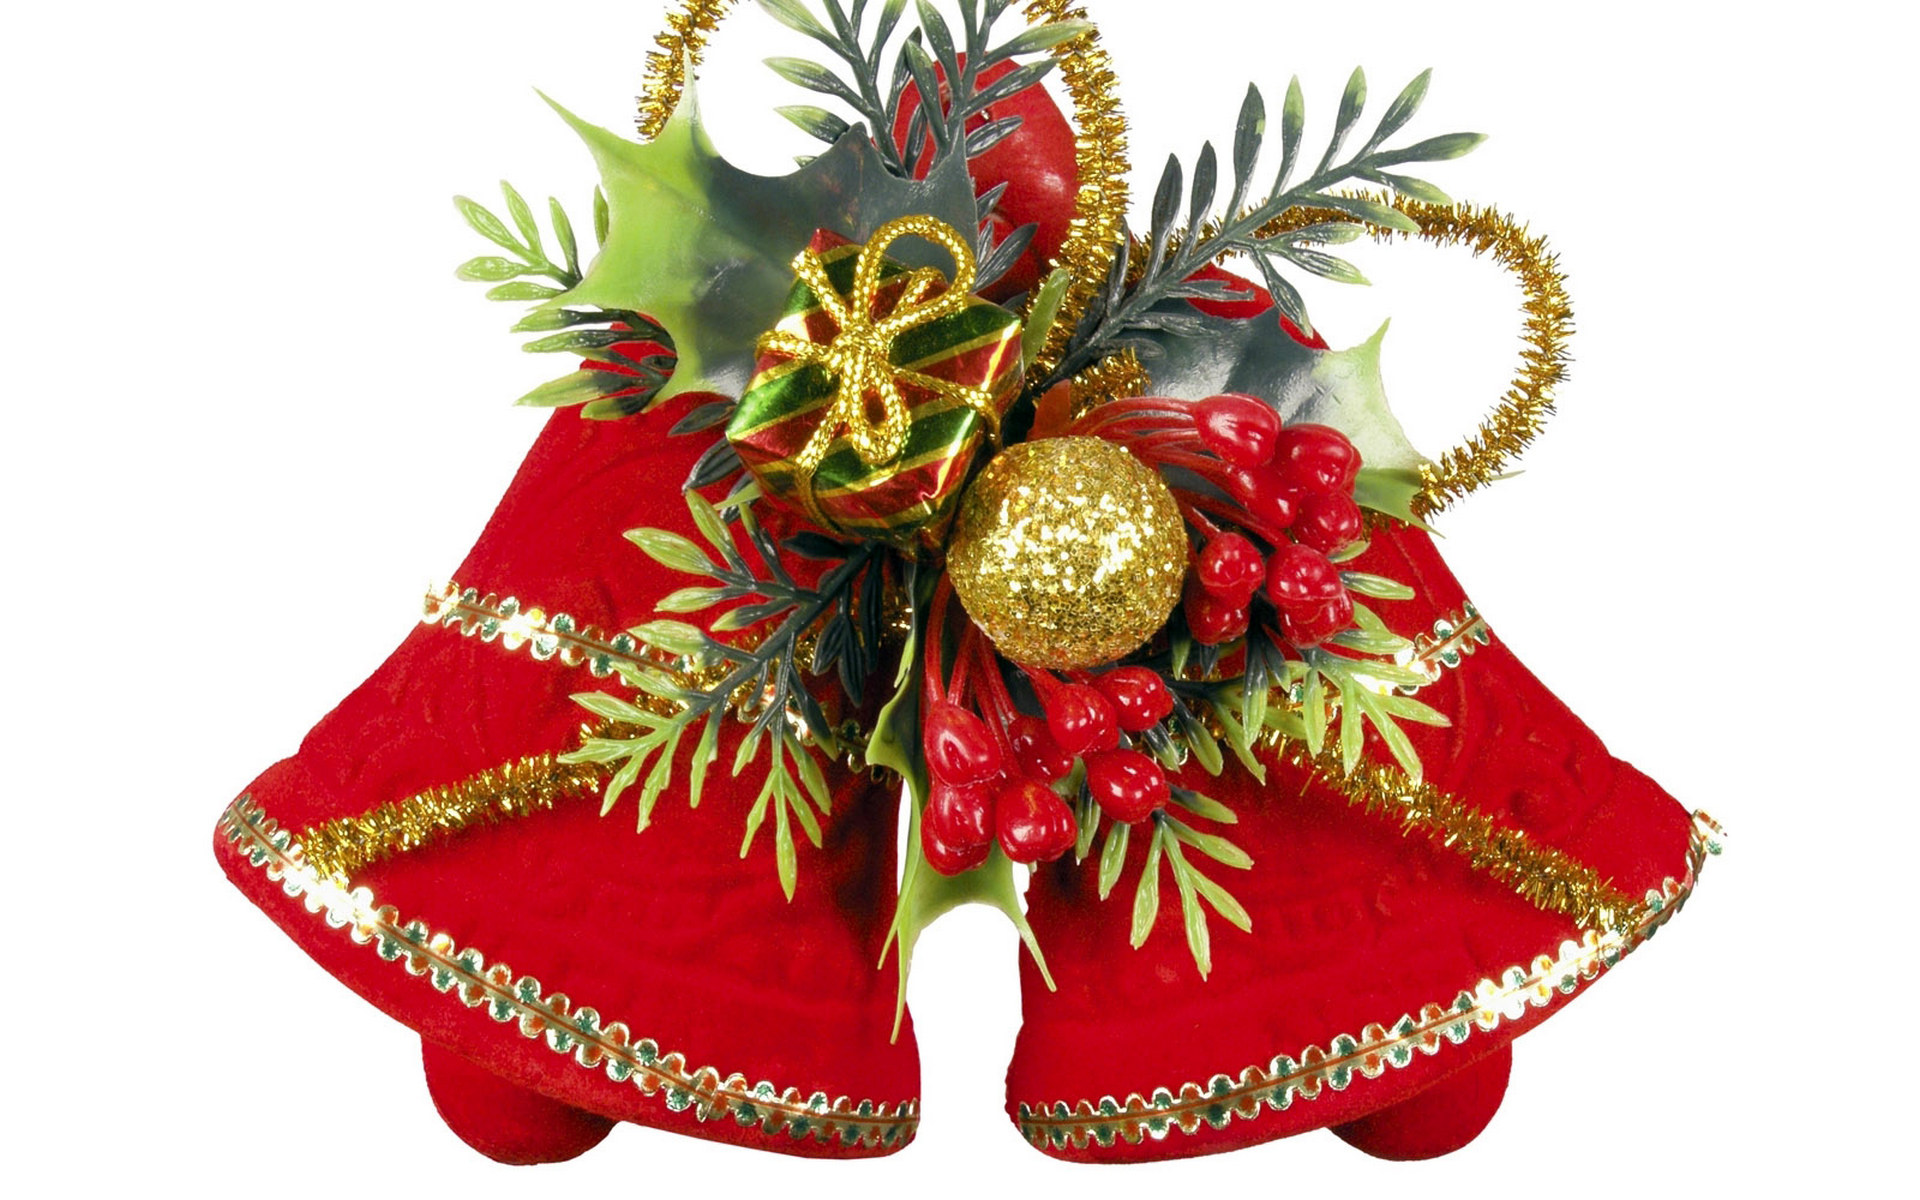 Christmas Items Buying Company in Noida